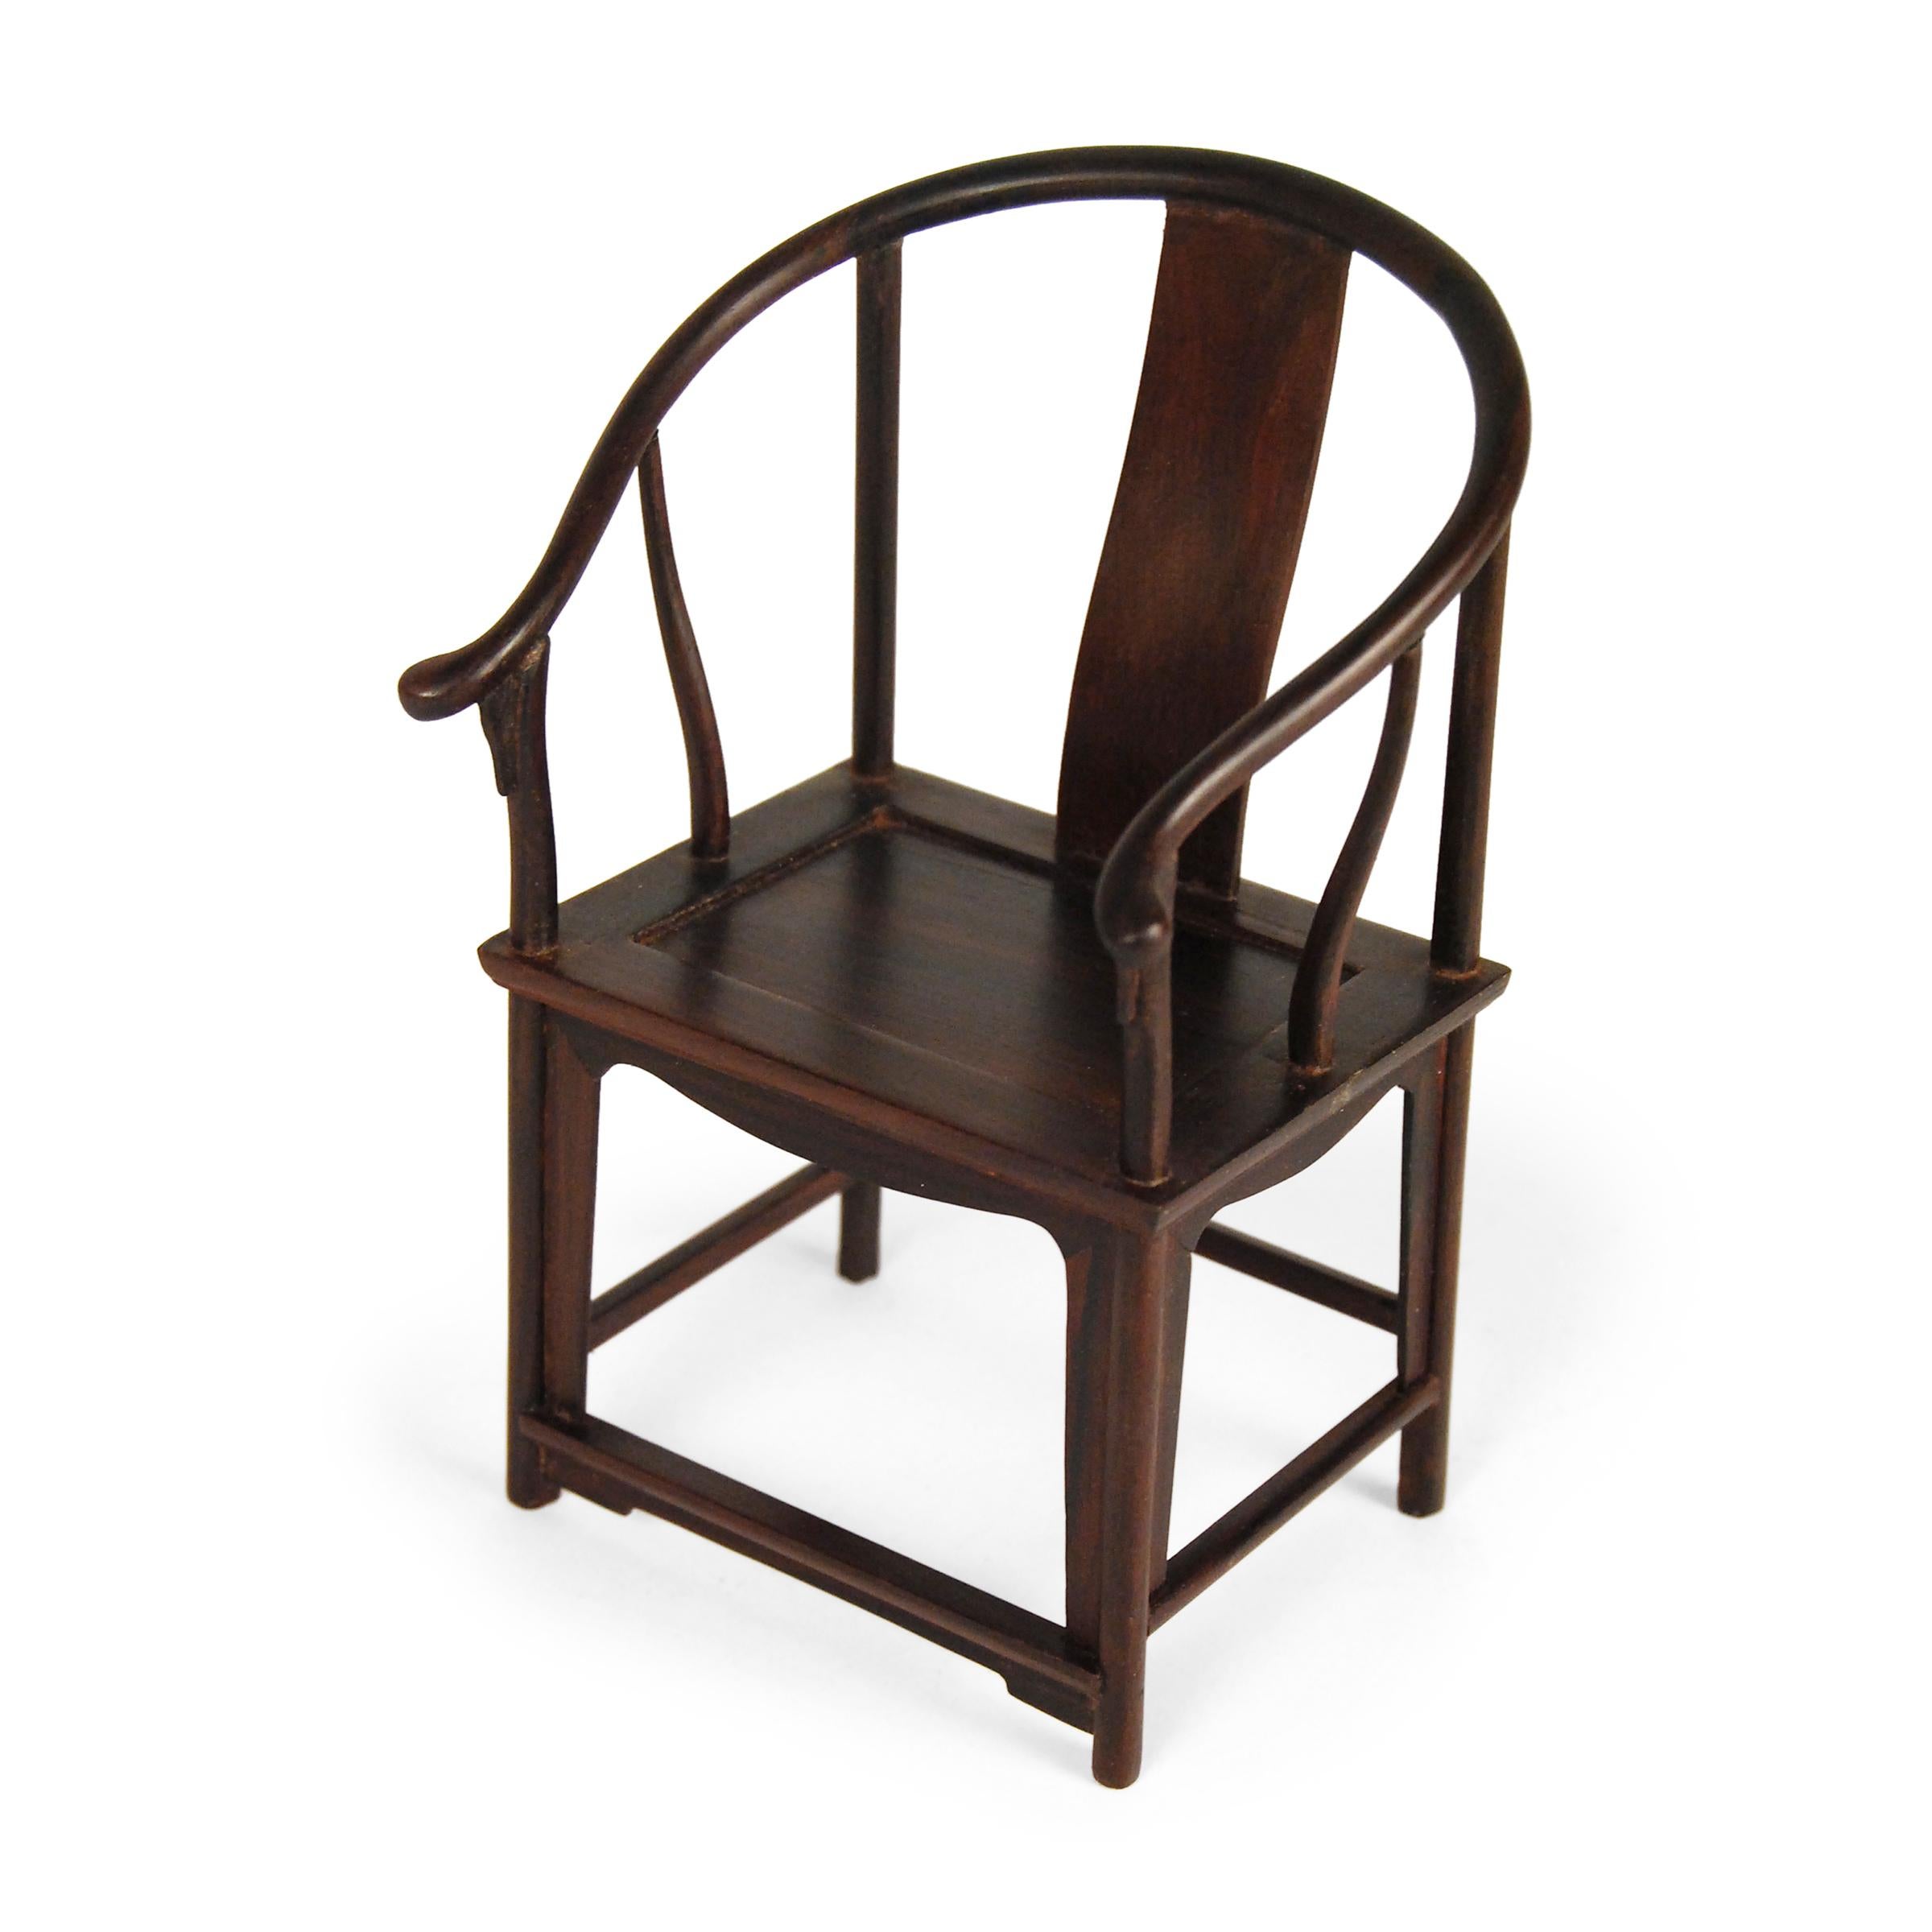 This miniature furniture set - at only 6 inches tall - beautifully recreates classic Chinese furniture forms down to the finest of details. Crafted of a beautiful hardwood, prized for its strength and dark color, the set includes a side table and